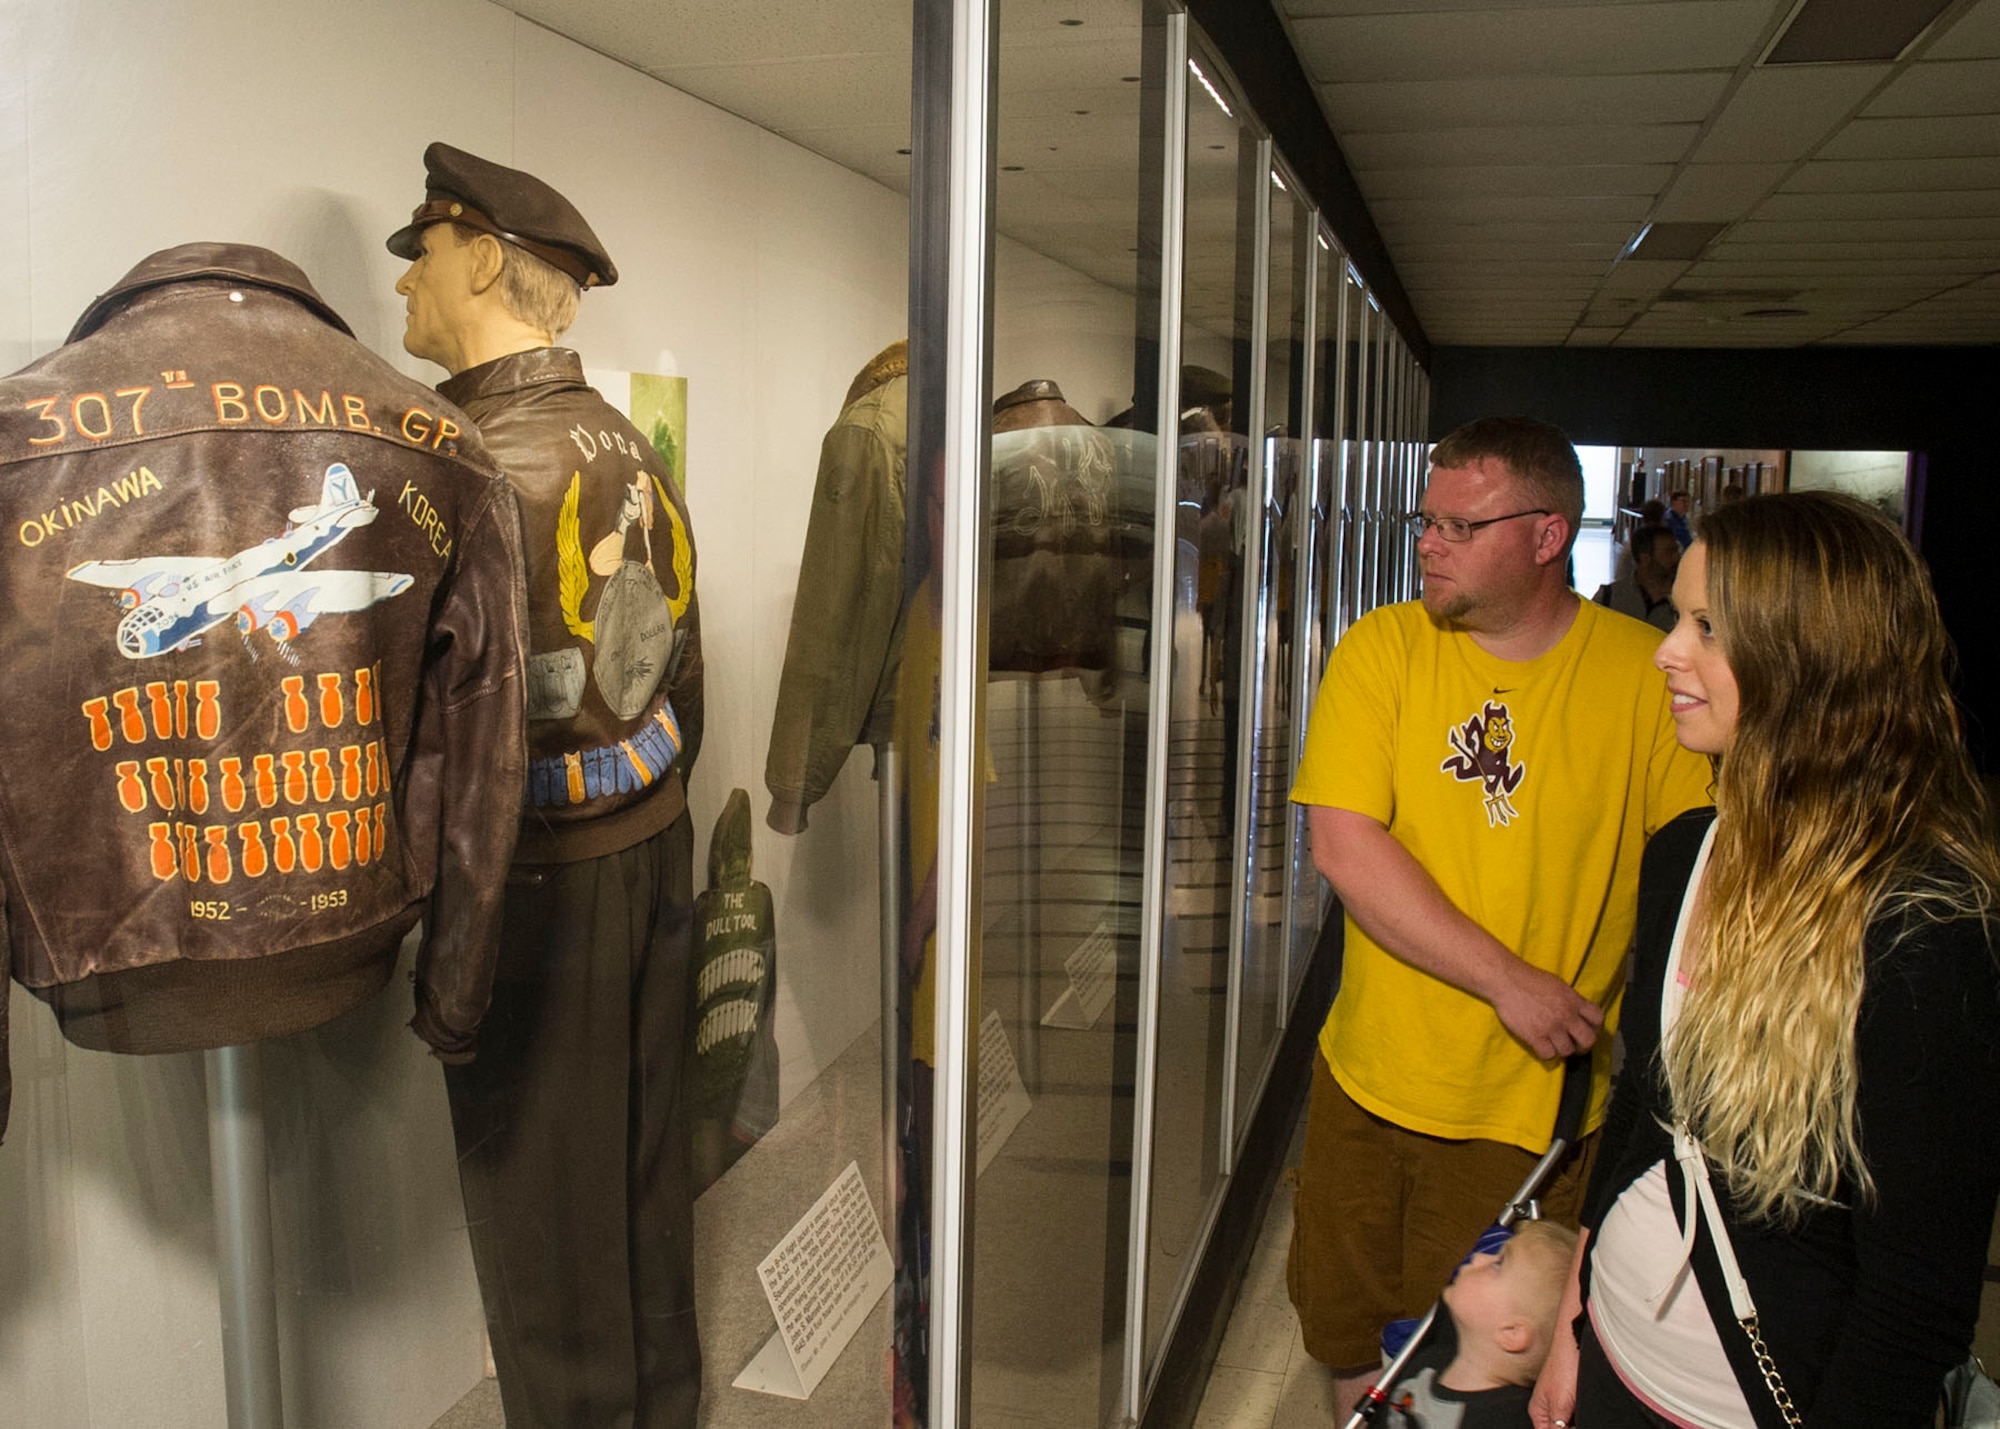 World War II Aviator Jackets exhibit at the National Museum of the U.S. Air Force. (U.S. Air Force photo by Ken LaRock)